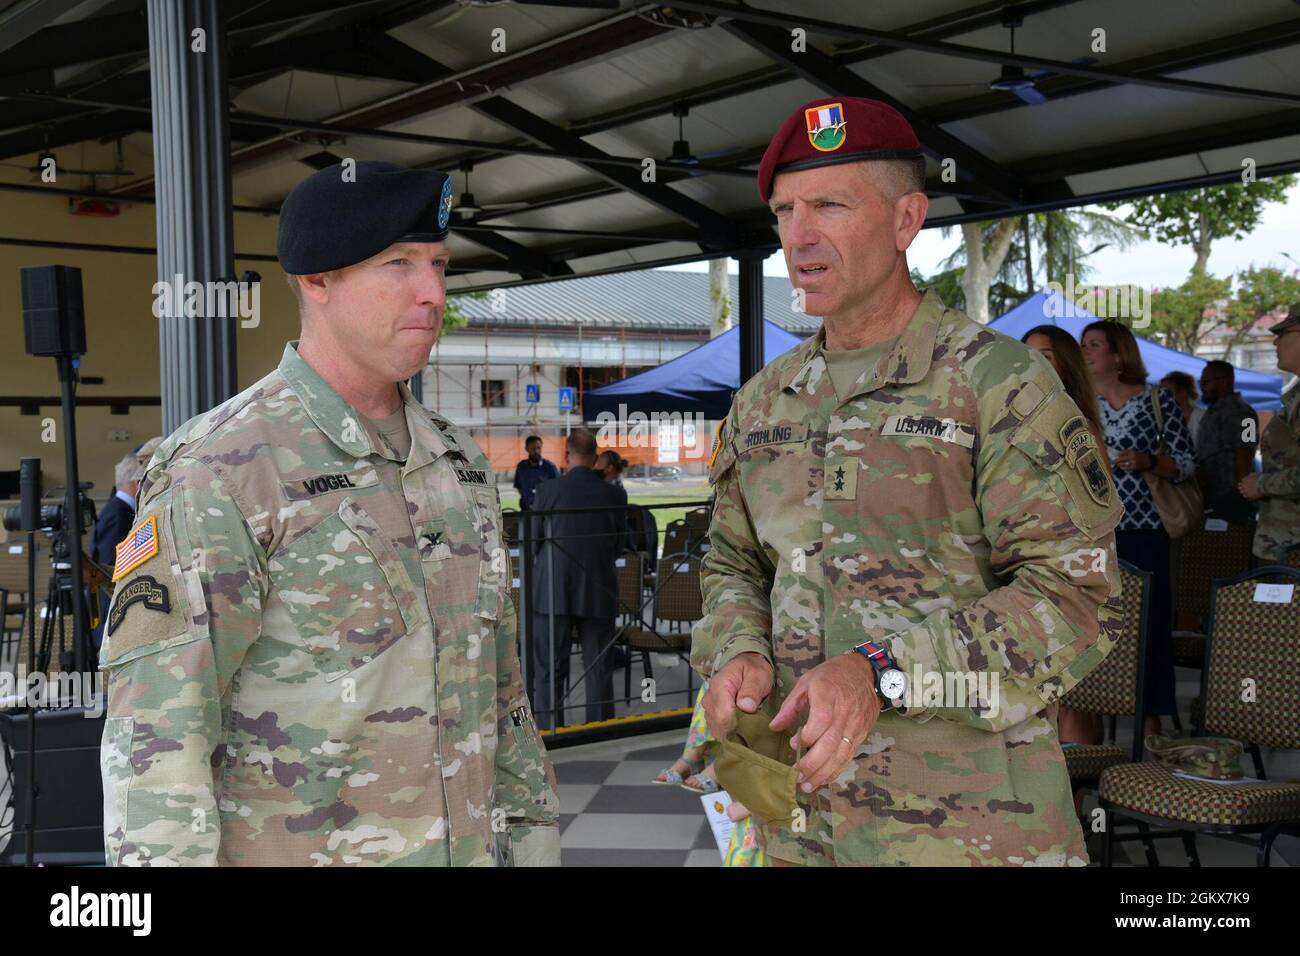 Maj. Gen. Andrew M. Rohling, U.S. Army Southern European Task Force, Africa commander, right, speaks with on Col. Daniel J. Vogel, outgoing commander of U.S. Army Garrison Italy, left, during change of command ceremony under Covid-19 prevention condition at Caserma Ederle, Vicenza, Italy July 16, 2021. Stock Photo